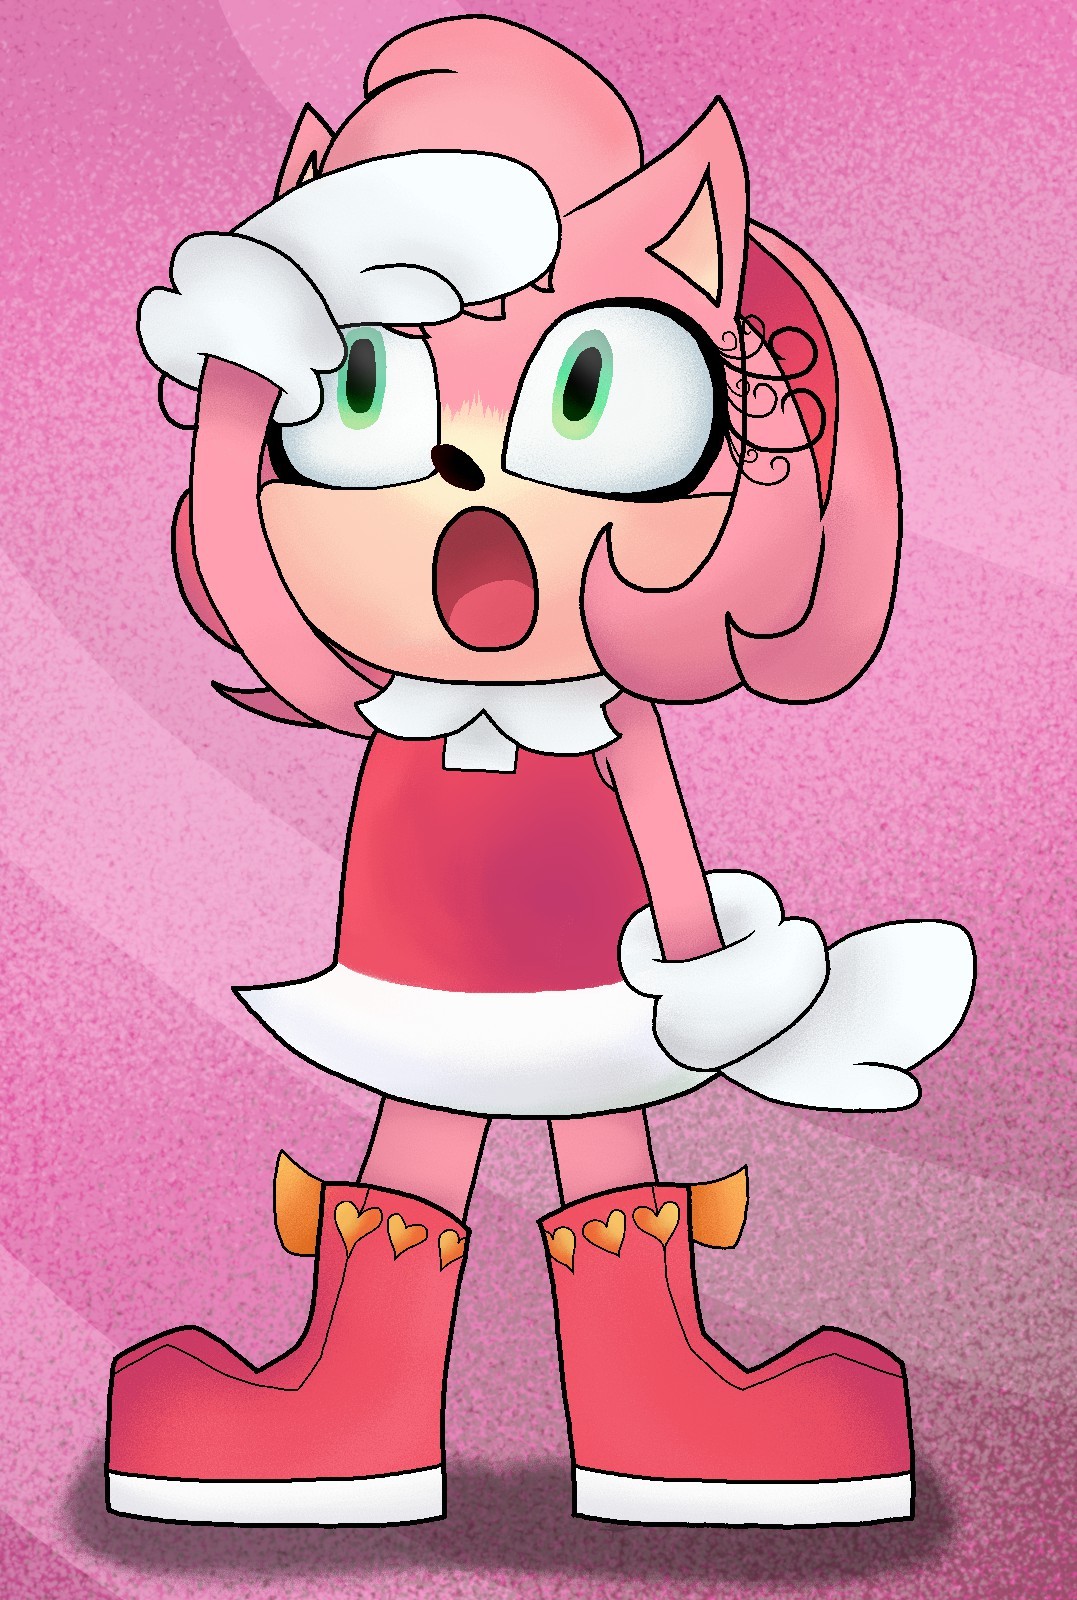 I decided to draw @aresworld-suniverse​ version of movie Amy since she LOOKED VERY CUTE !!!
For this drawing, I did a mix of blending with the blending tool and especially the stipple pen. I also stylized Amy just because I wanted to try something...